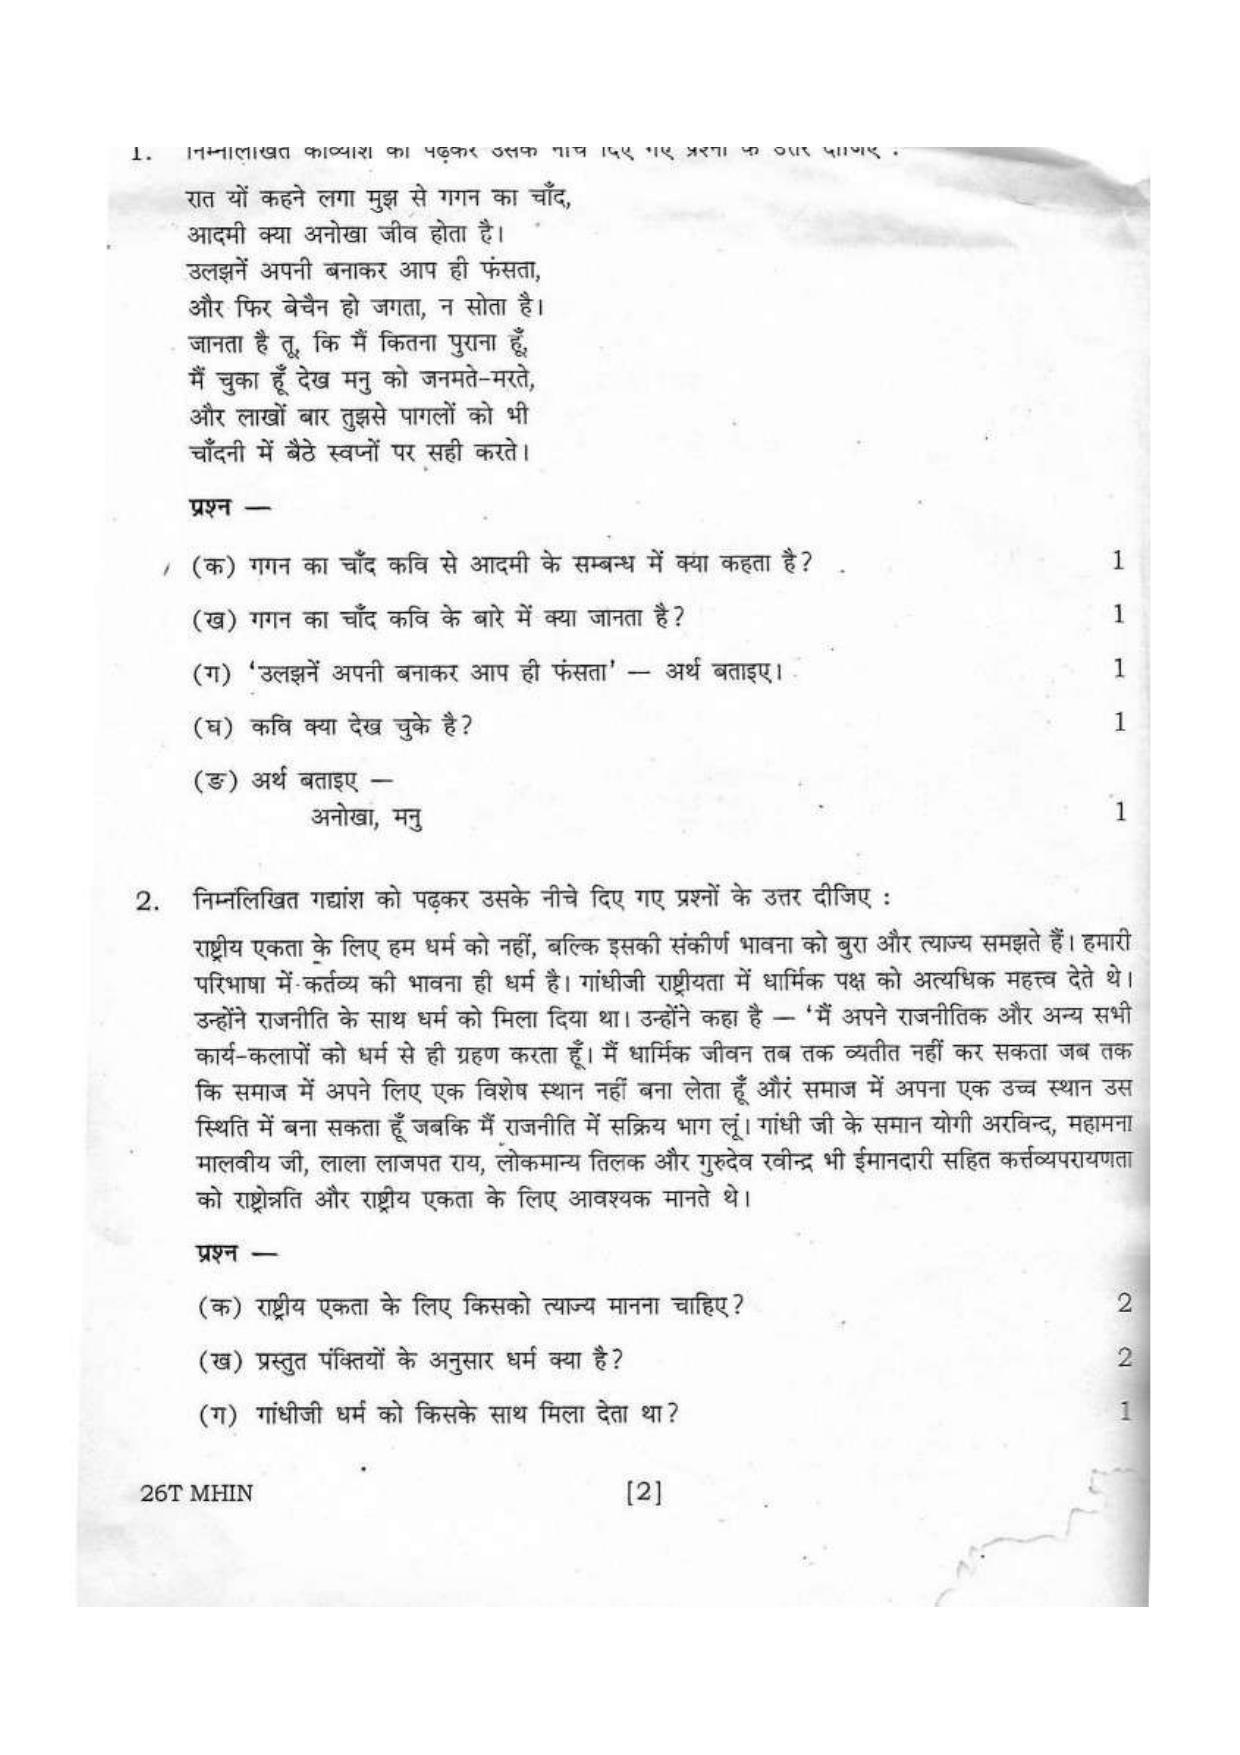 Assam HS 2nd Year Hindi MIL 2016 Question Paper - Page 2